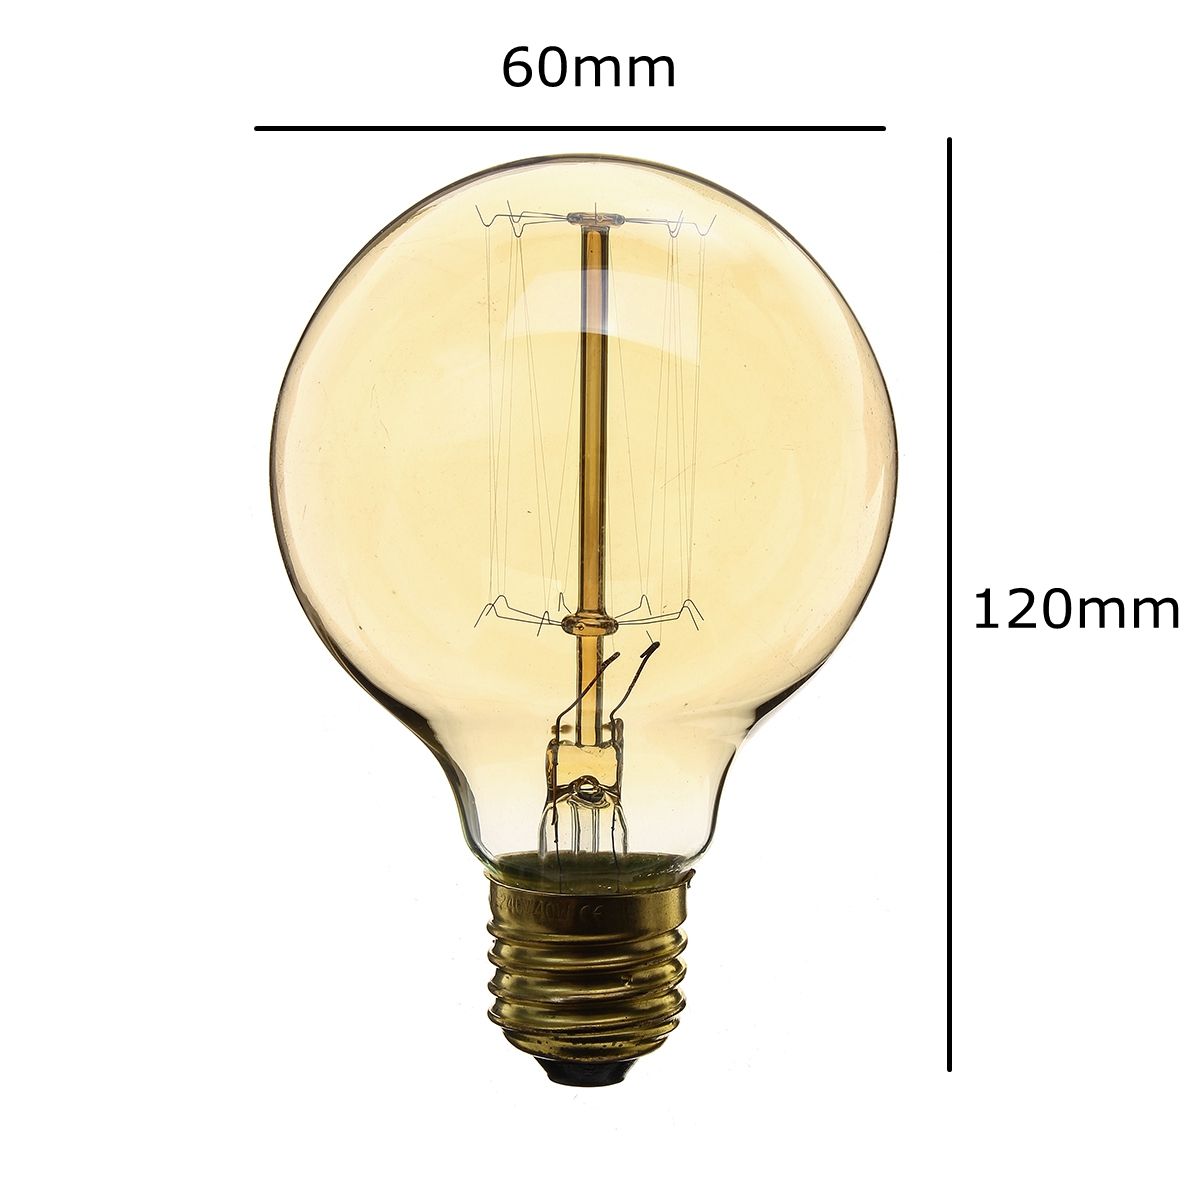 6PCS-Dimmable-AC220V-G80-E27-40W-Warm-White-Incandescent-Light-Bulbs-for-Indoor-Home-Decoration-1511983